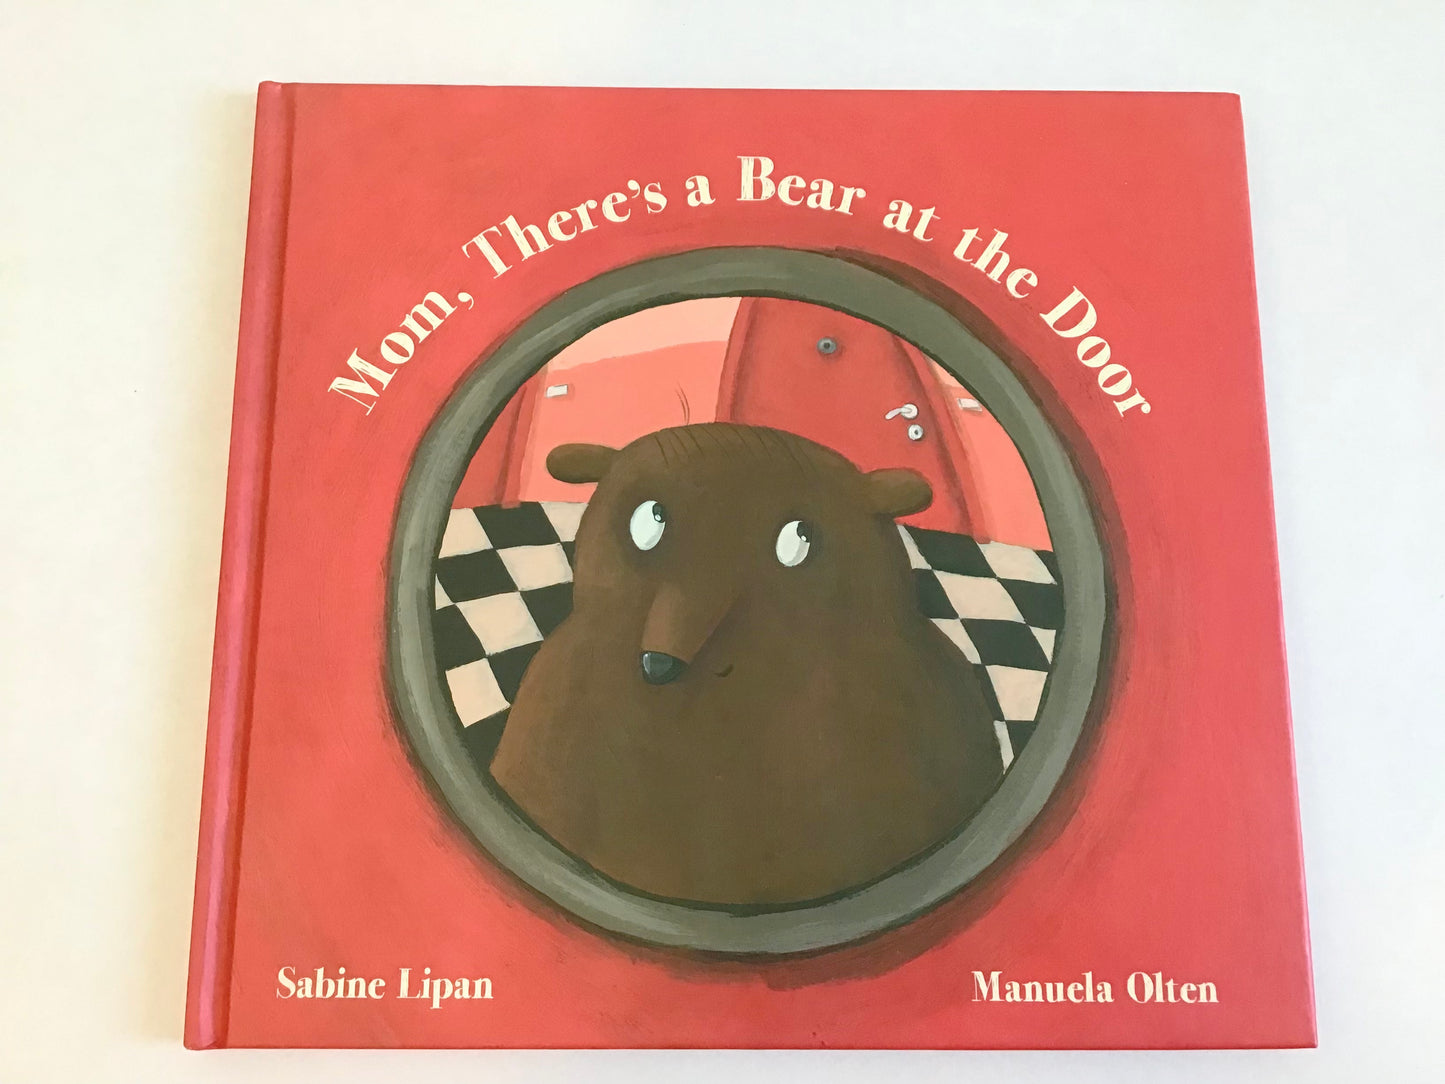 Mom There's a Bear at the Door by Sabine Lipan